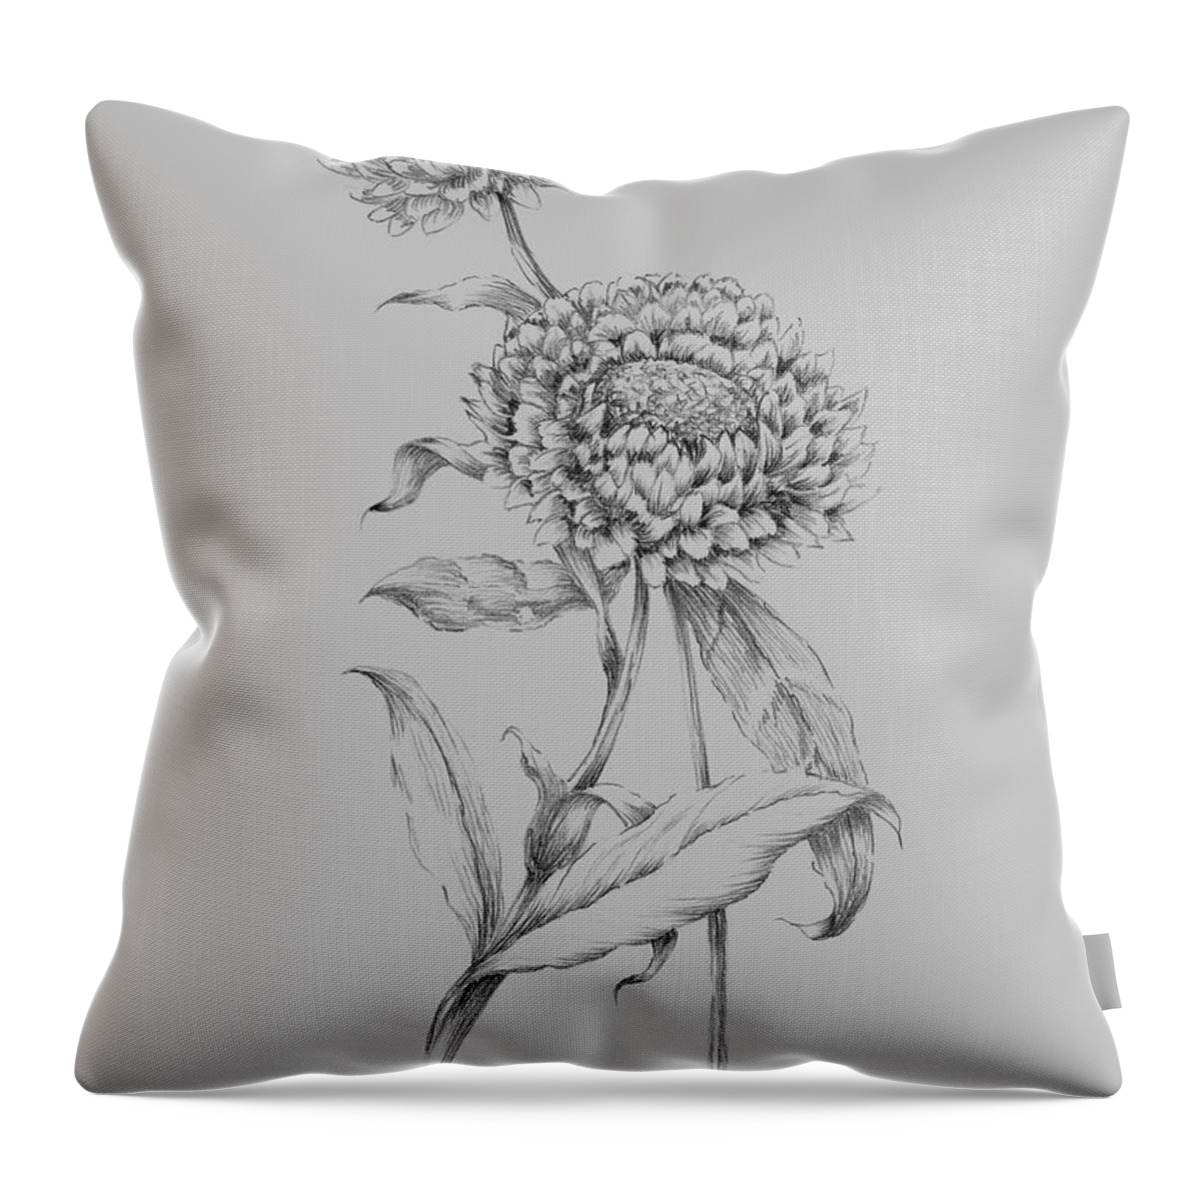 Flower Throw Pillow featuring the mixed media Flower Drawing 3 by Naxart Studio